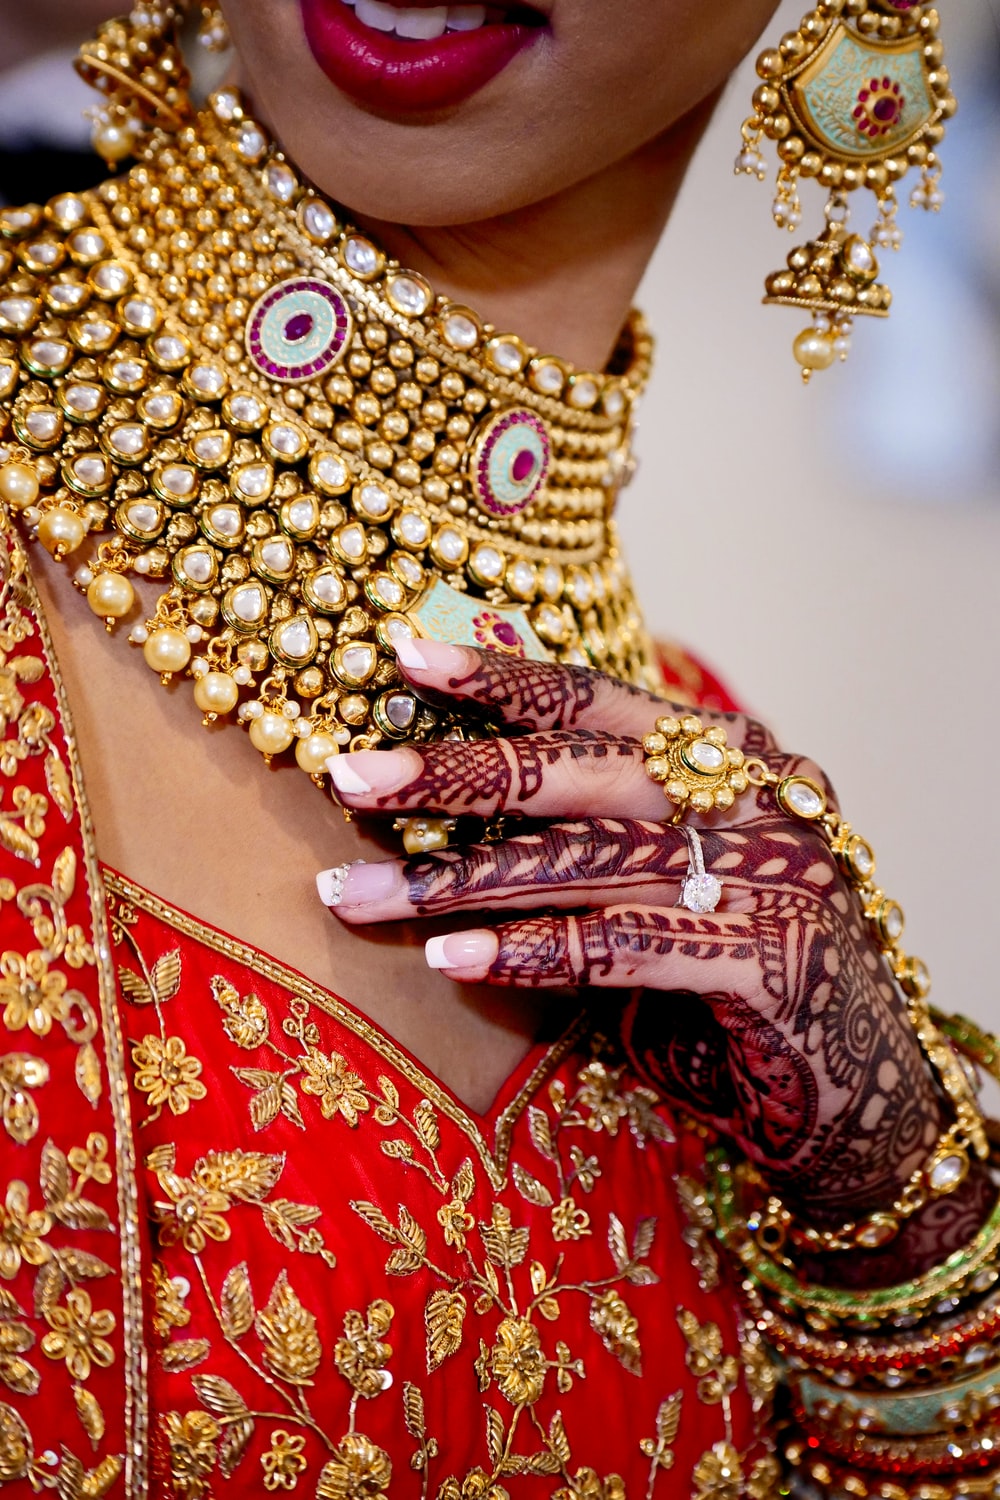 Indian Jewelry Picture. Download Free Image